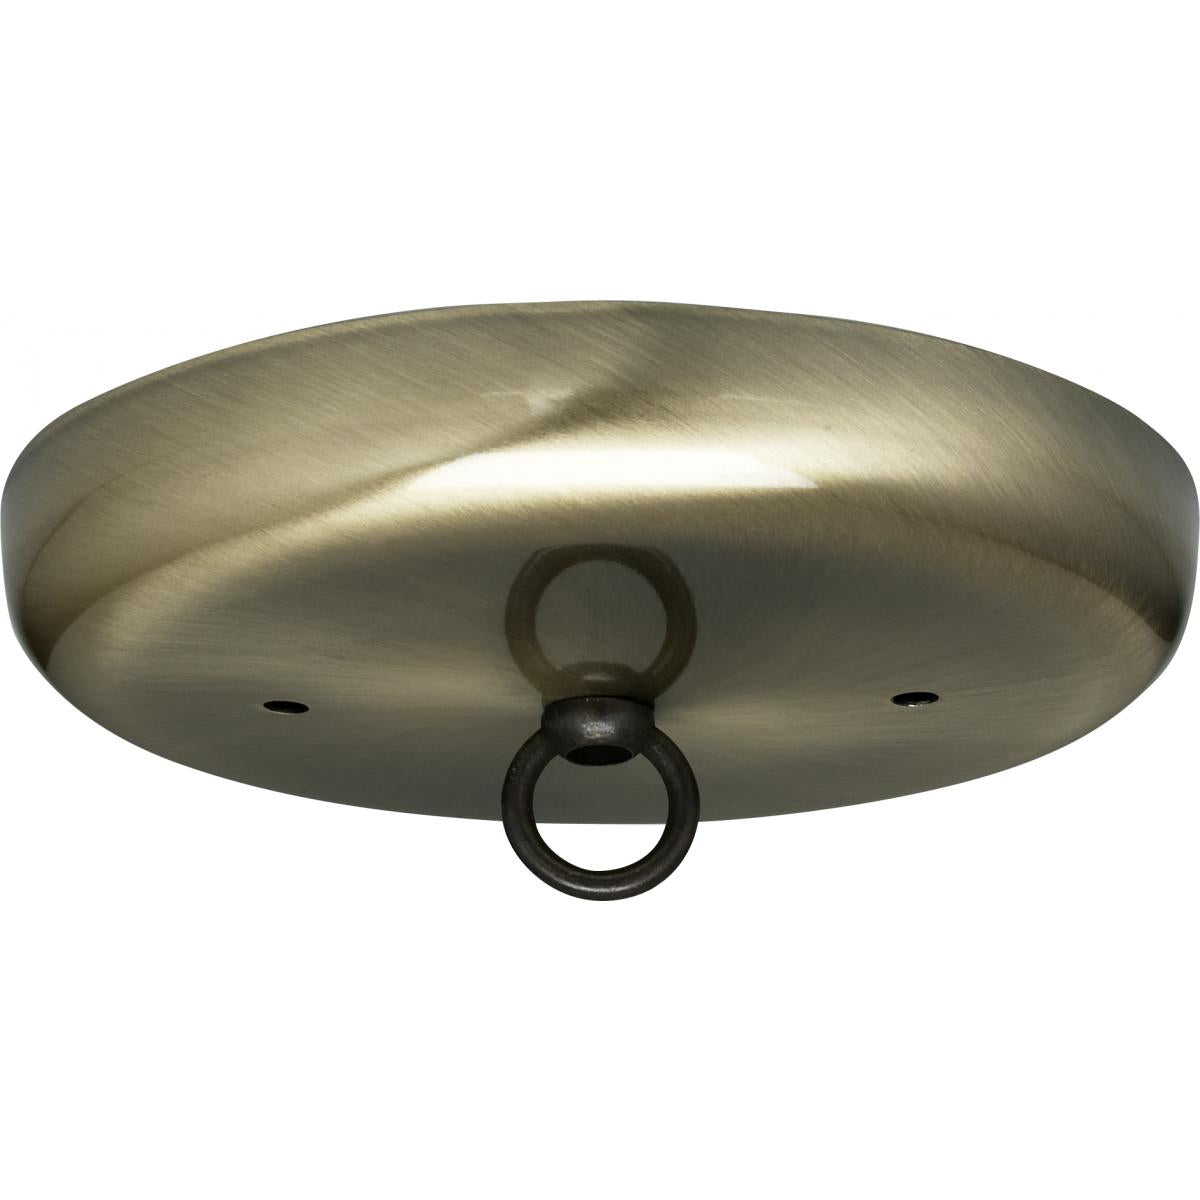 Satco 90-892 Contemporary Canopy Kit Antique Brass Finish 5" Diameter 7/16" Center Hole 2-8/32 Bar Holes Includes Hardware 10lbs Max